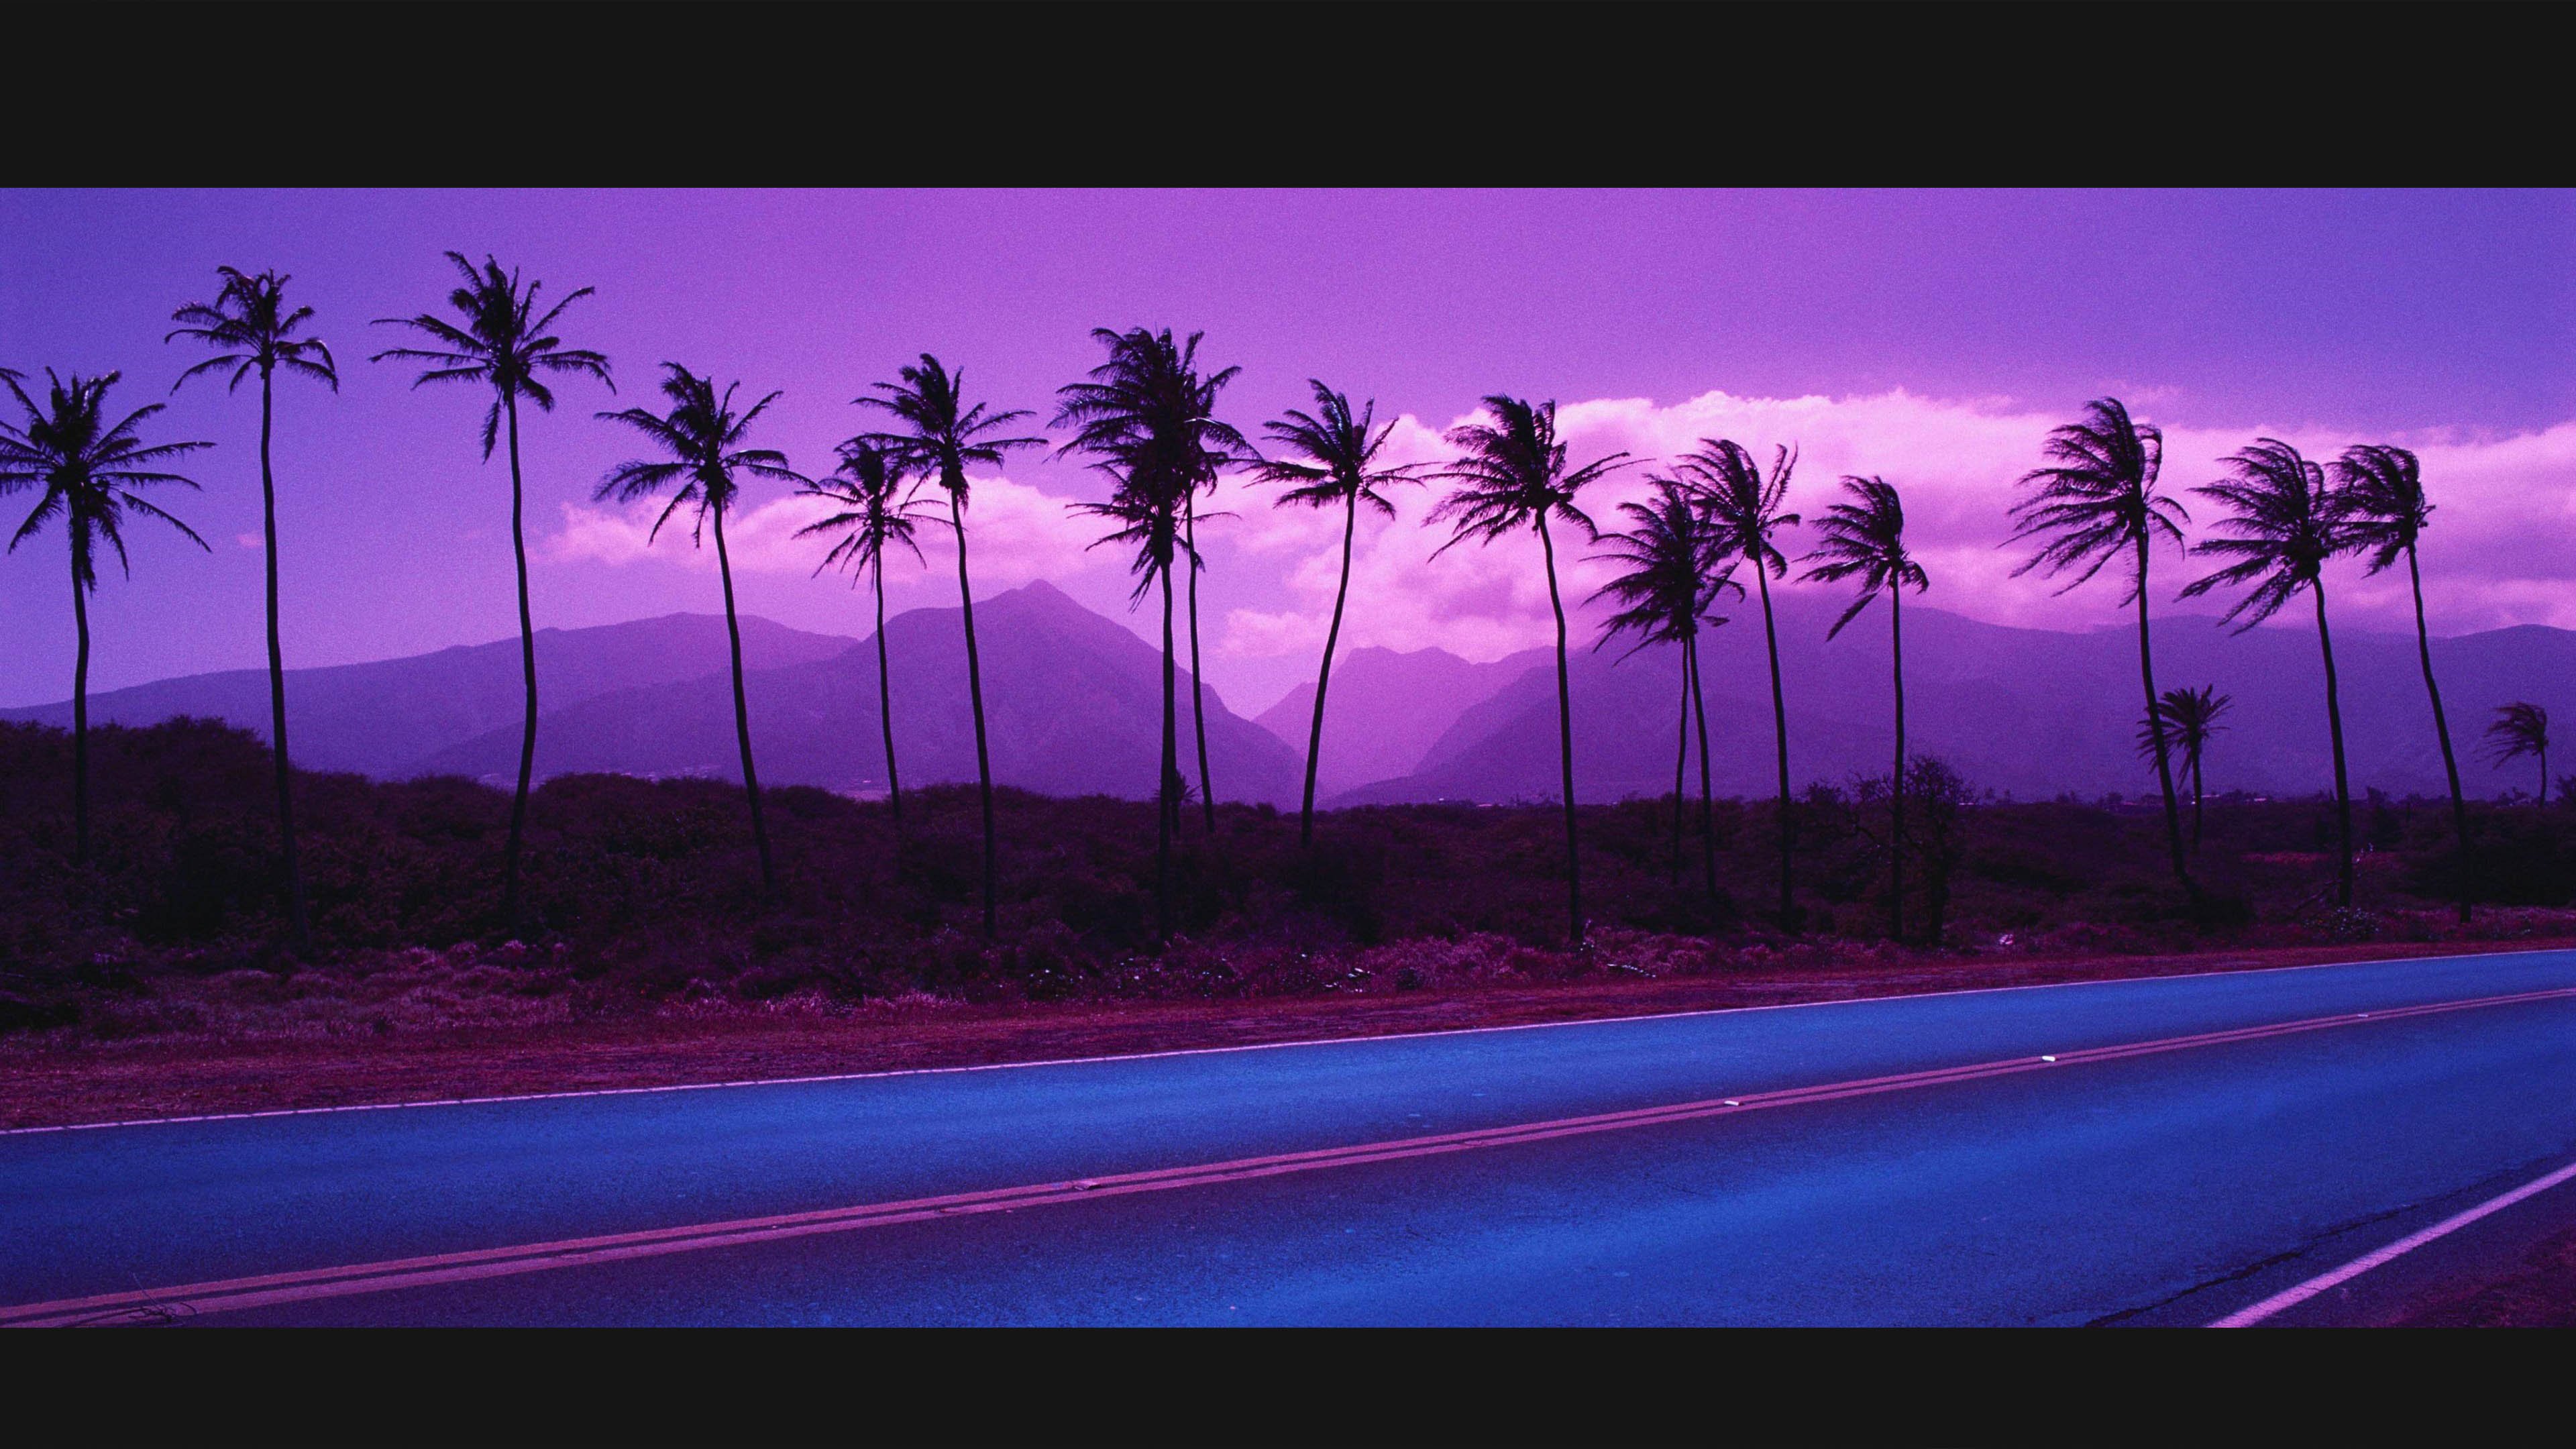 Violet 4K wallpapers for your desktop or mobile screen free and easy to